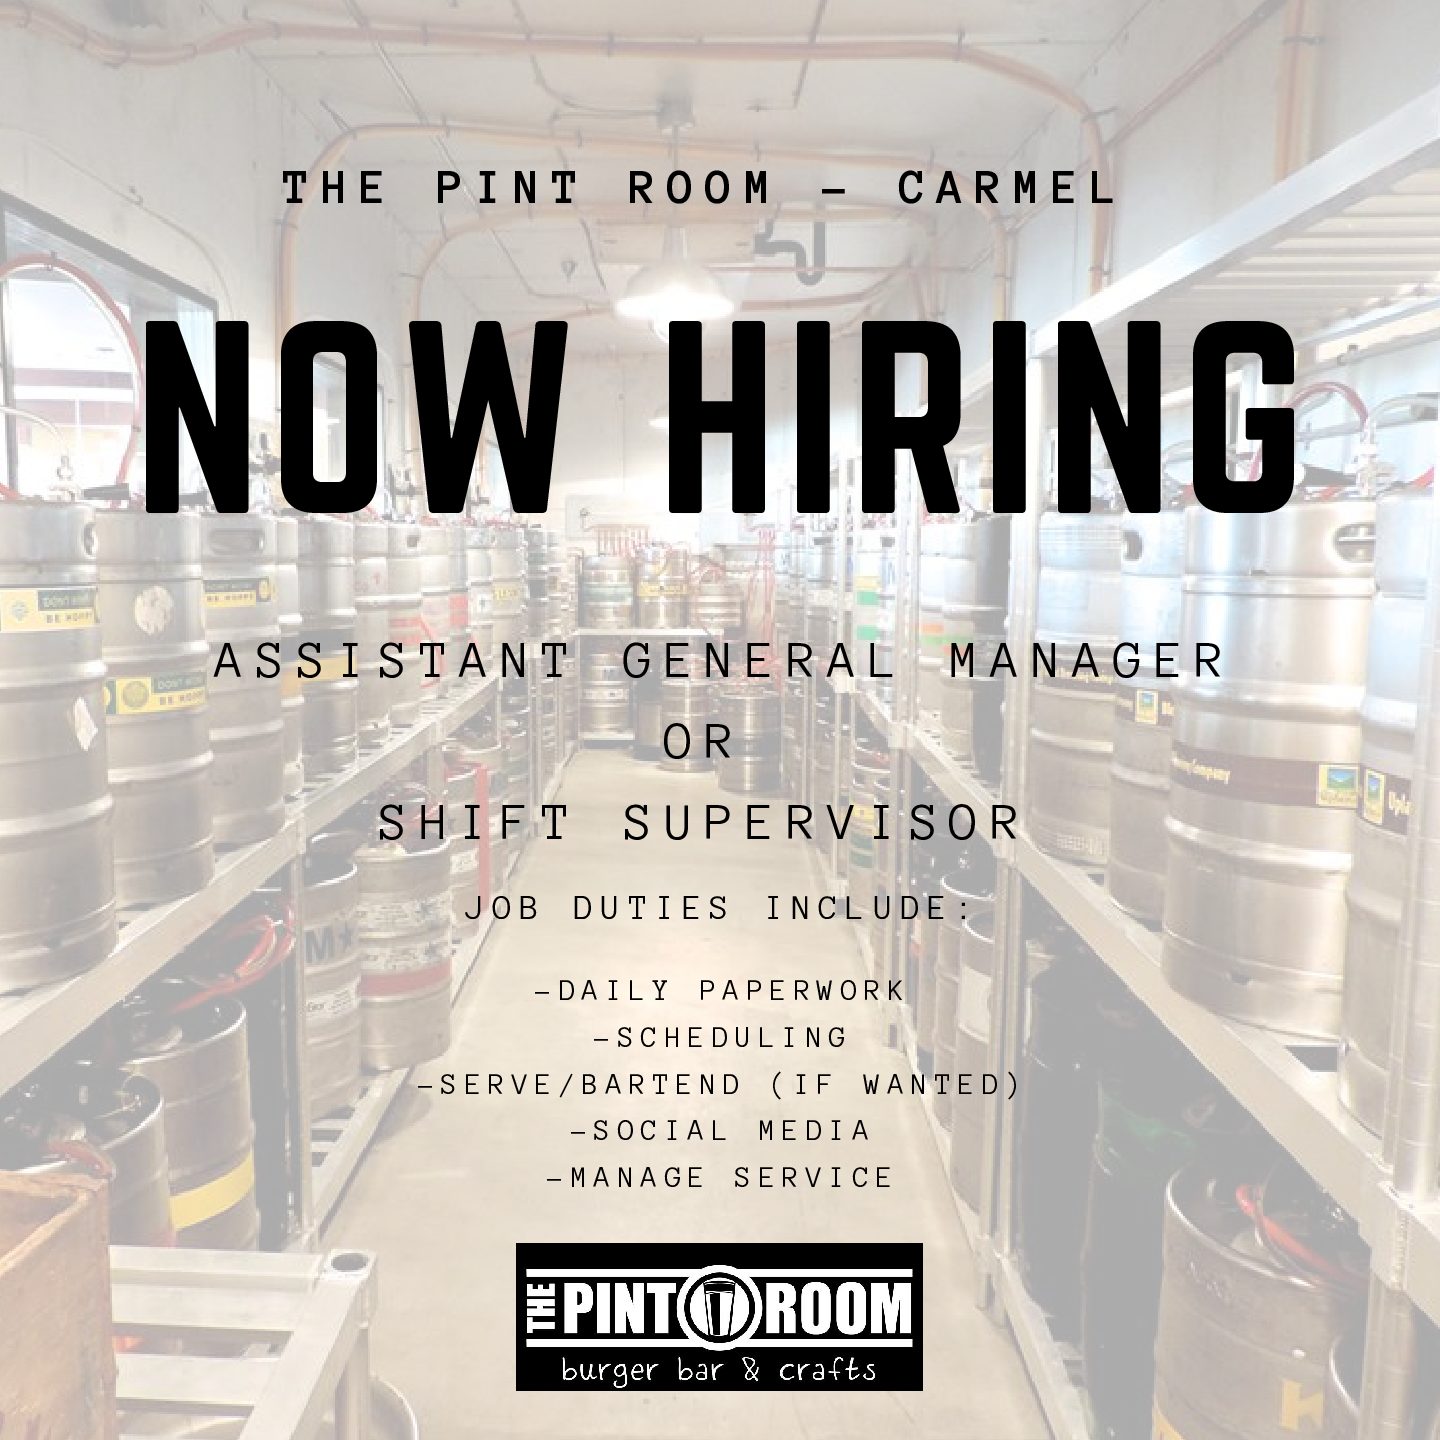 Indiana On Tap Pint Room Carmel Now Hiring For Assistant